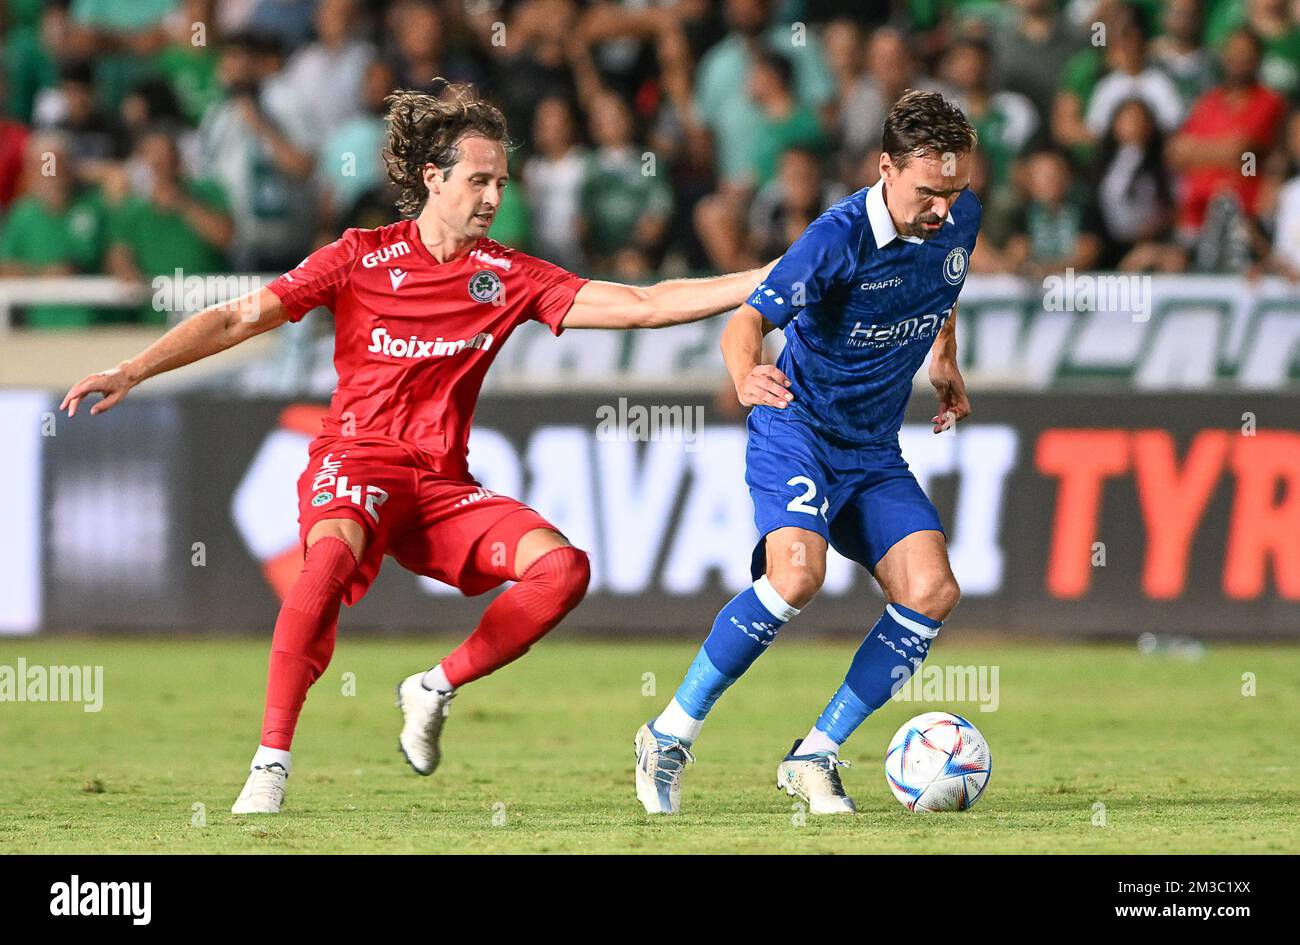 Omonia's Mix Diskerud and Gent's Sven Kums pictured in action during a soccer game between Cypriot Omonia Nicosia and Belgian KAA Gent in Nicosia, Cyprus on Thursday 25 August 2022, the return leg of the play-offs for the UEFA Europa League competition. BELGA PHOTO DAVID CATRY Stock Photo